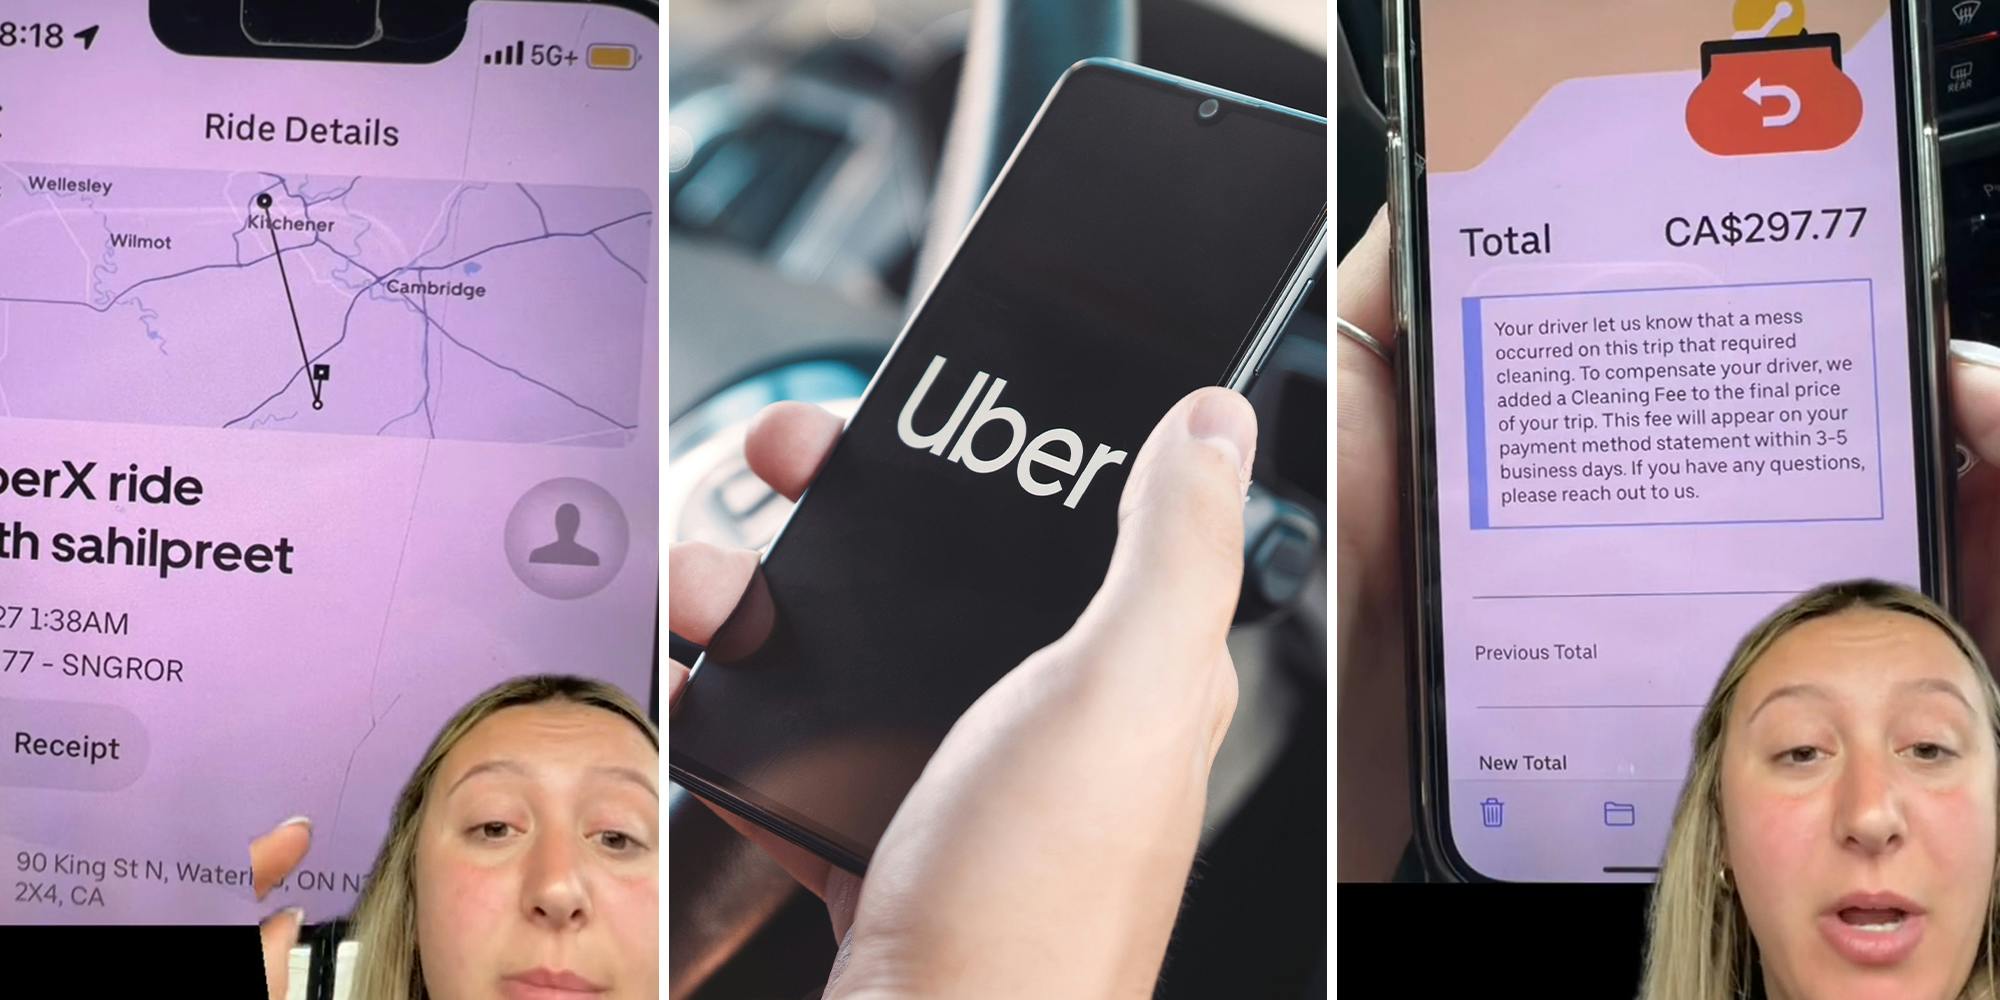 ‘Don’t take Uber anymore’: Uber customer warns of new scam drivers are pulling after being charged almost $300 extra